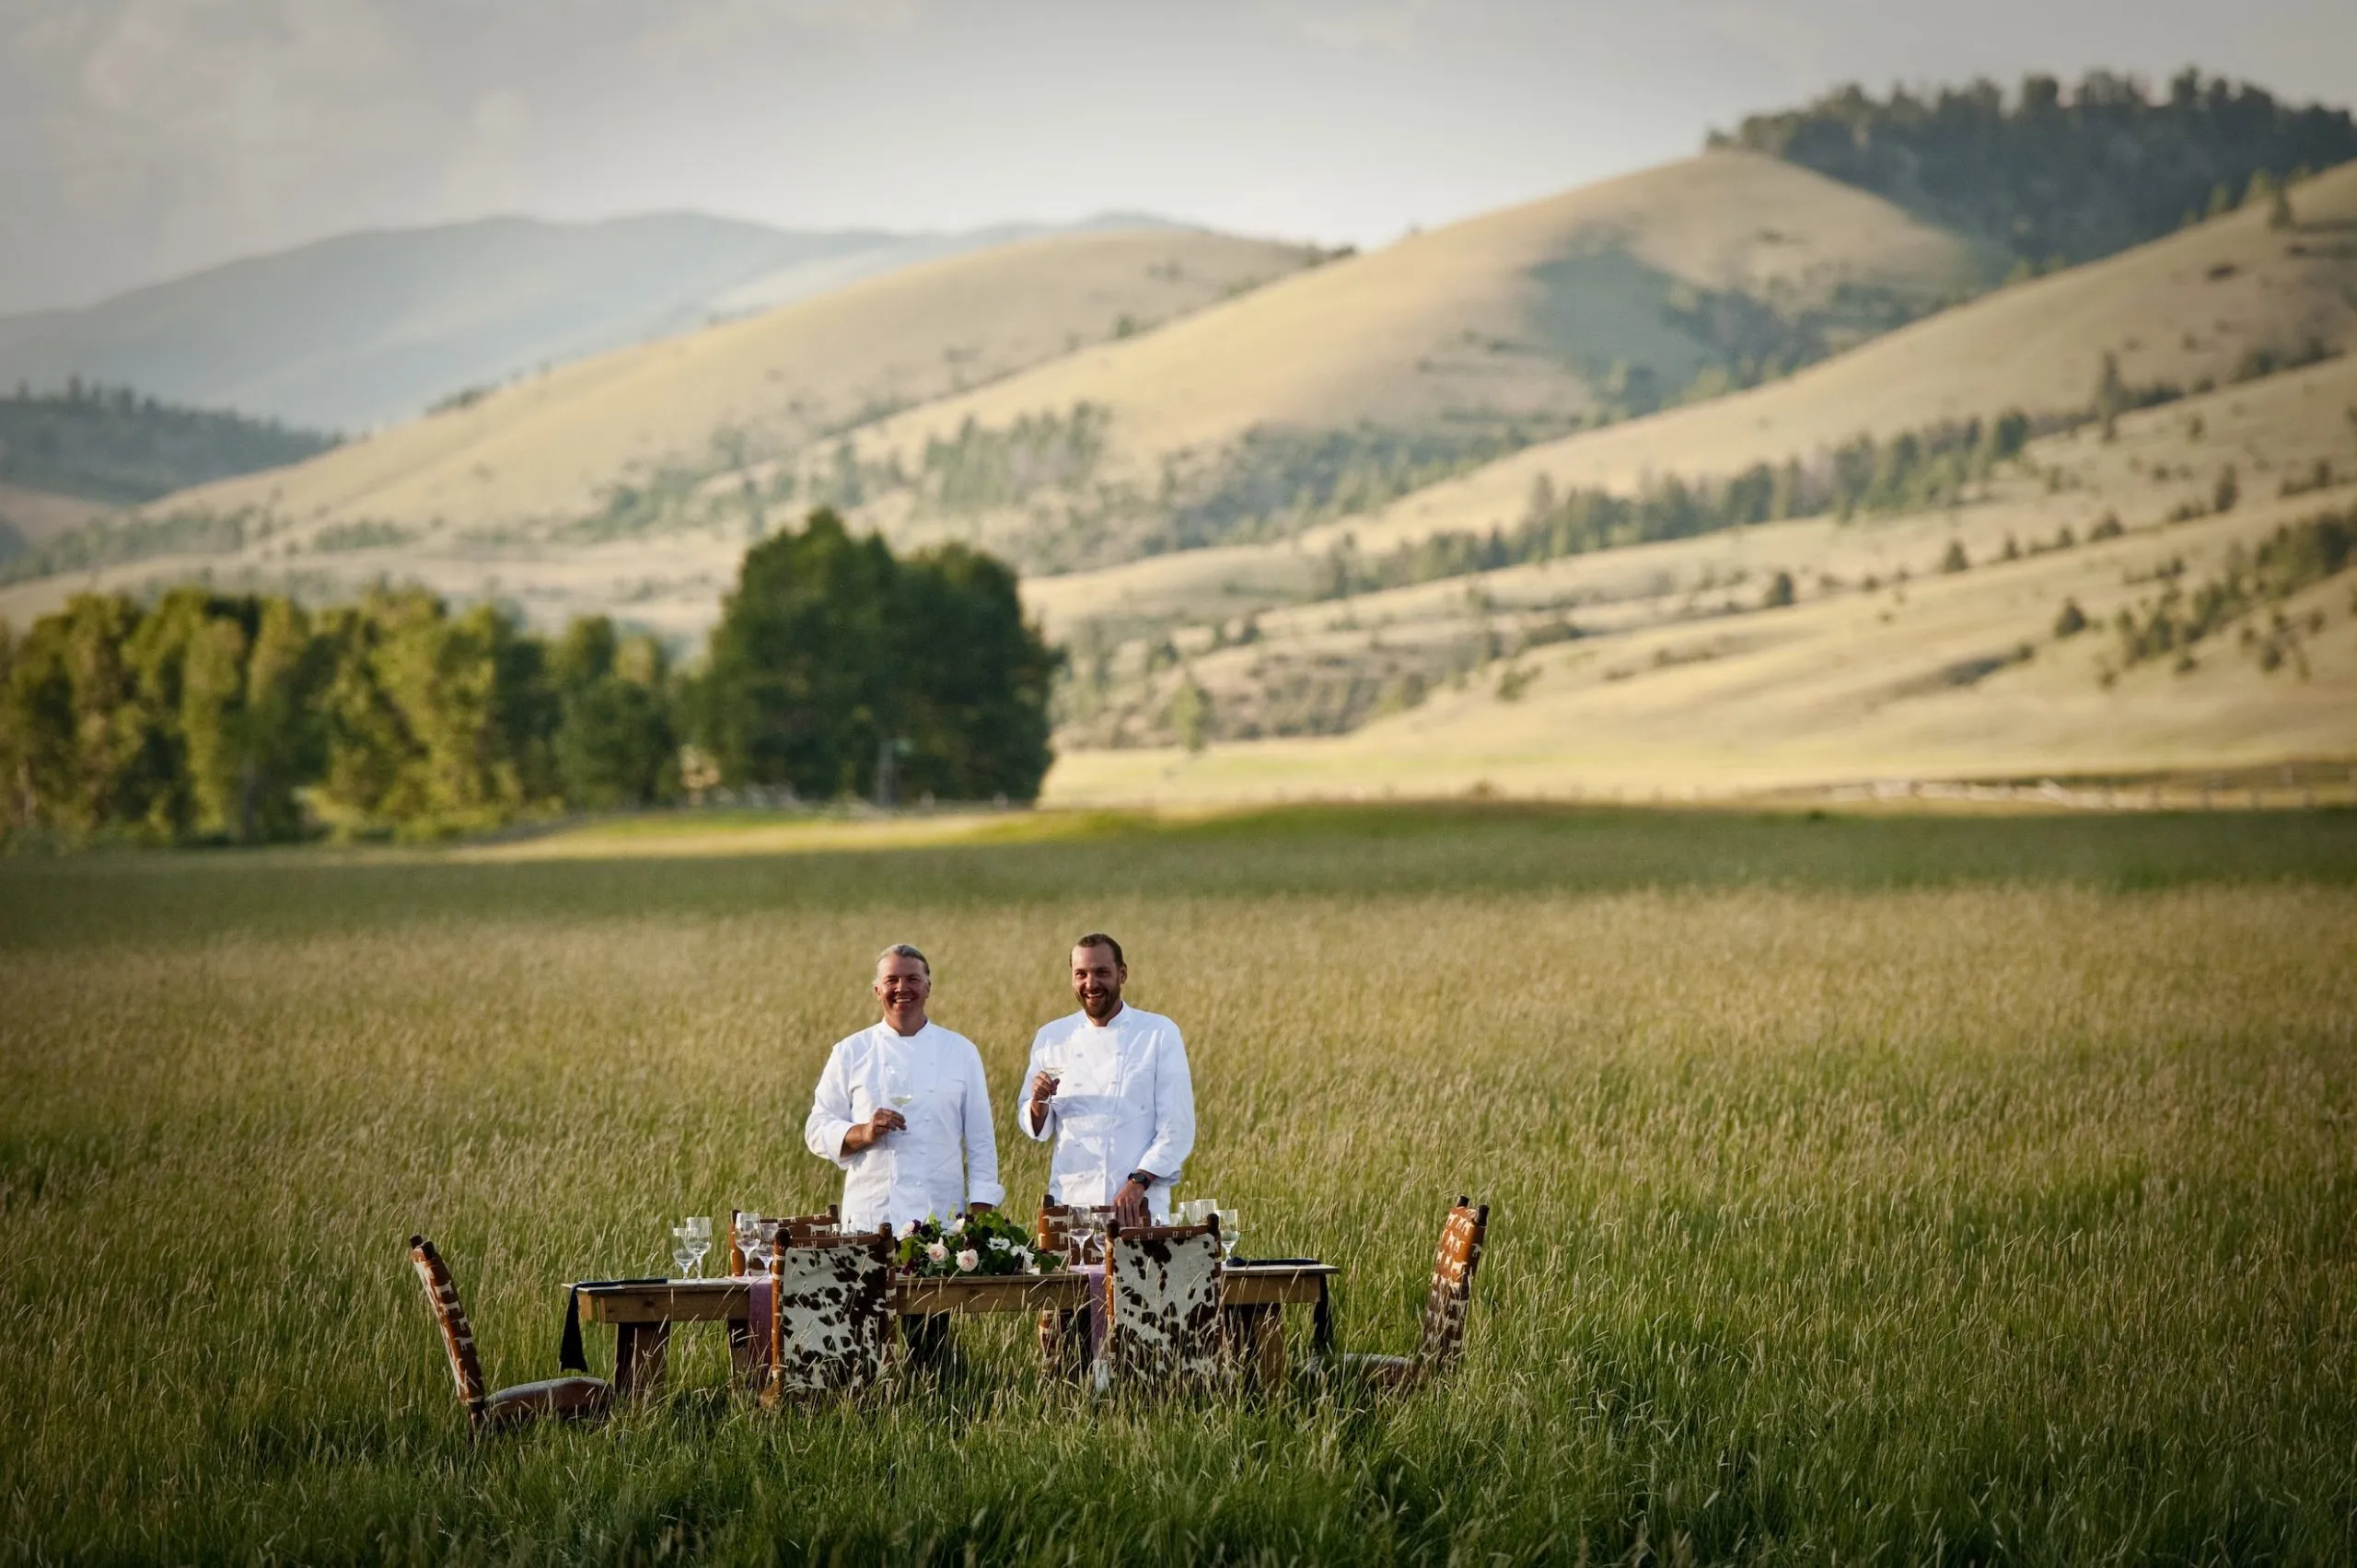 Two chefs stand at a dining table in an open field